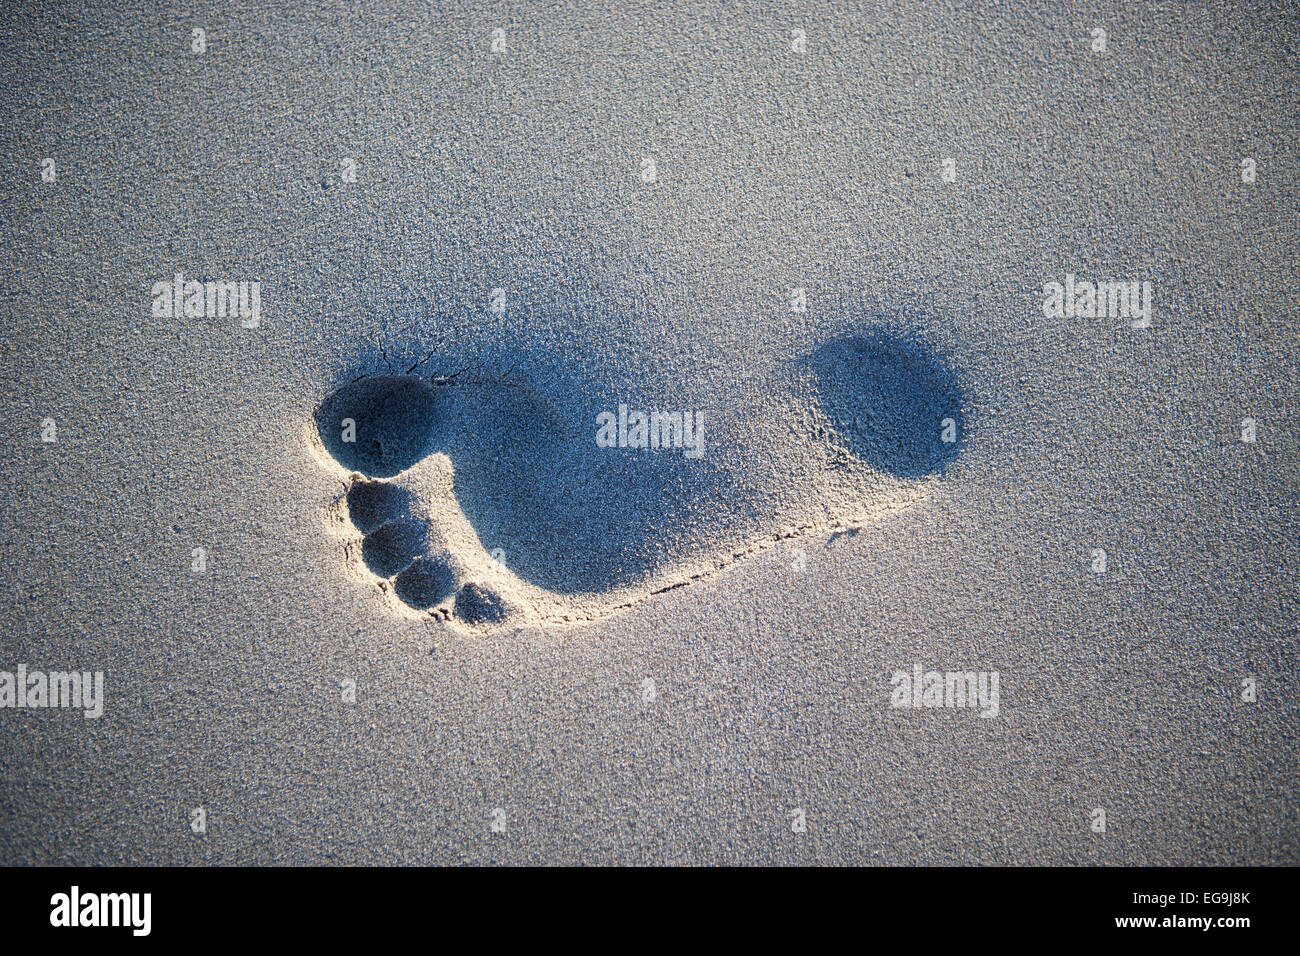 Footprint in the sand, on the beach, Greece Stock Photo